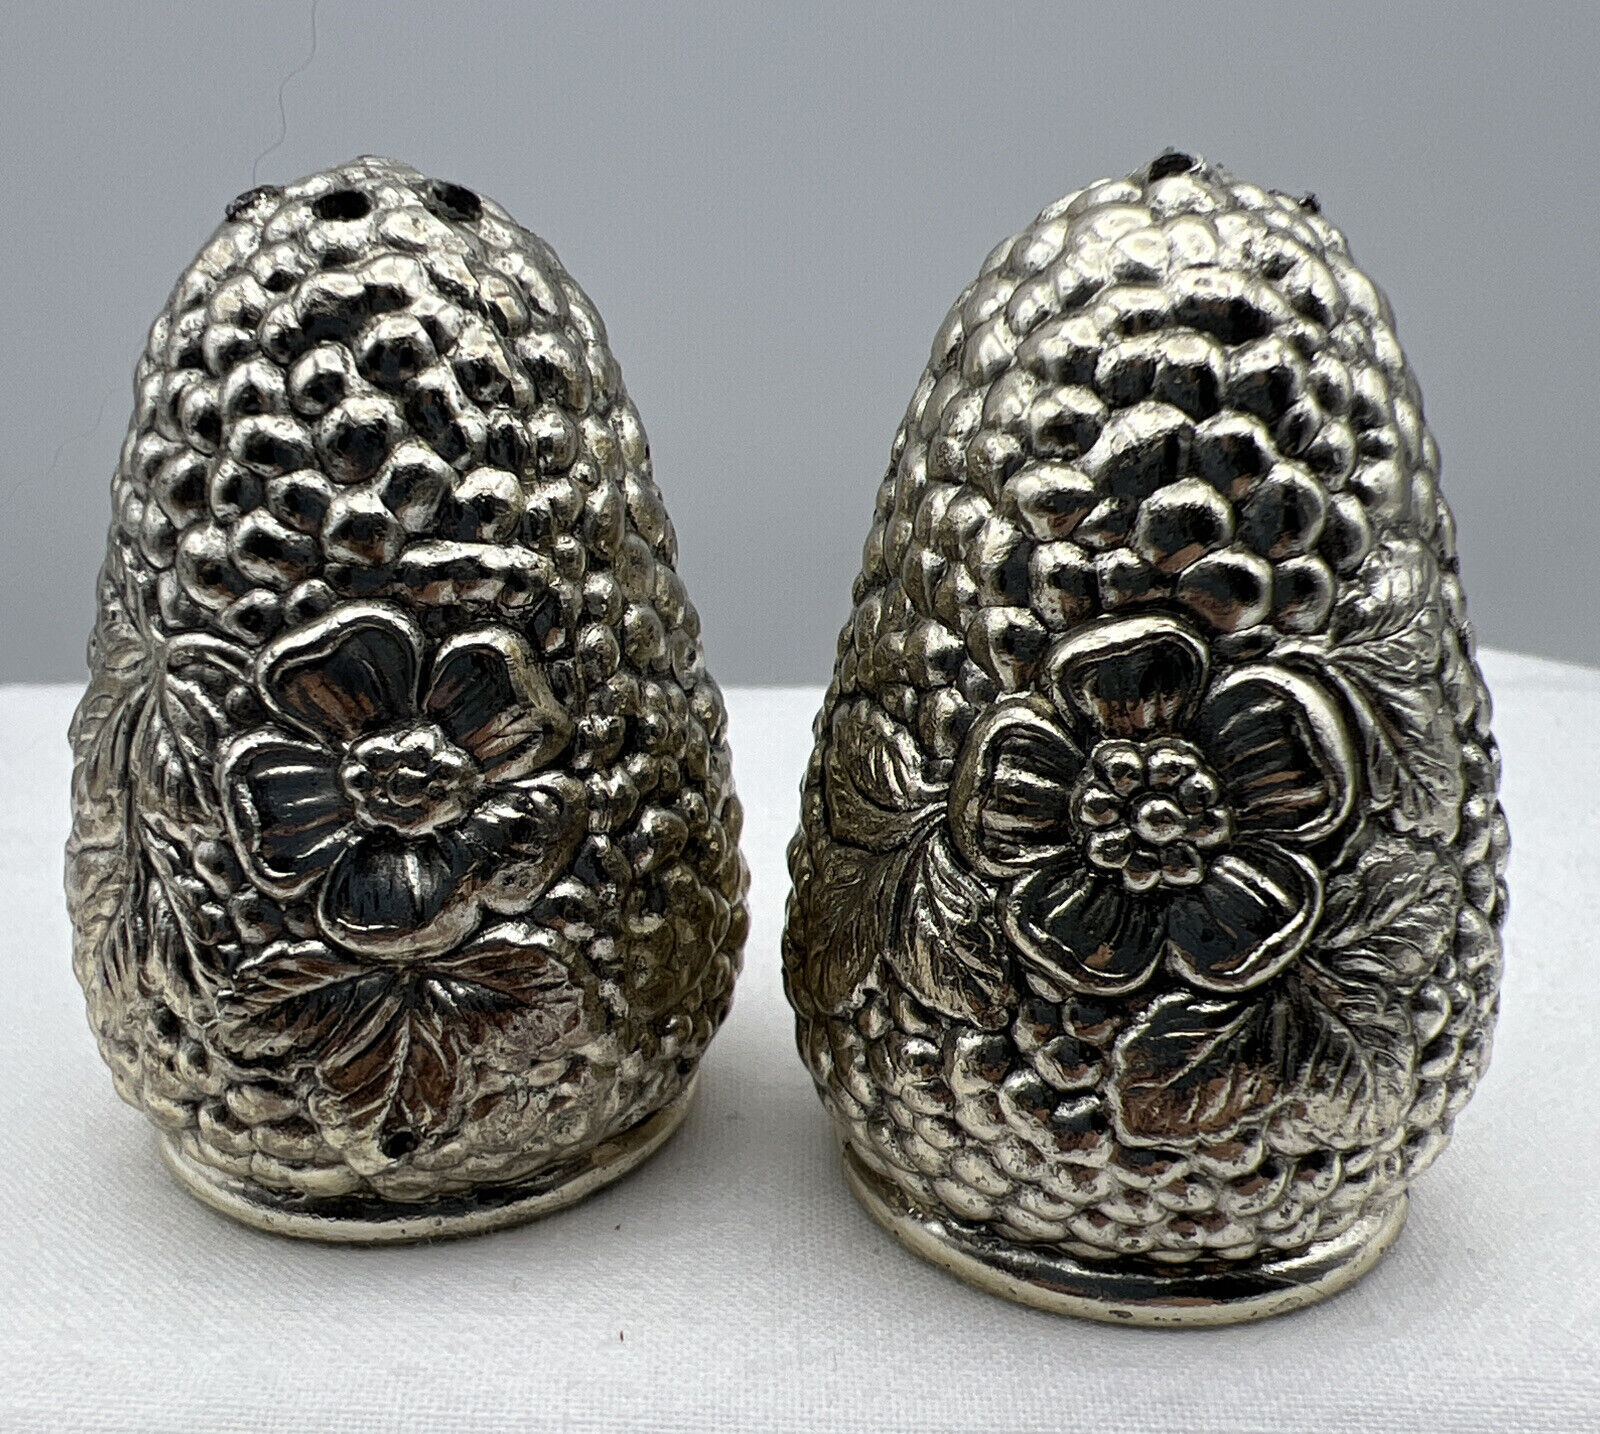 Vintage Textured Heavy Metal Pinecone Shaped Salt and Pepper Shakers Flowers